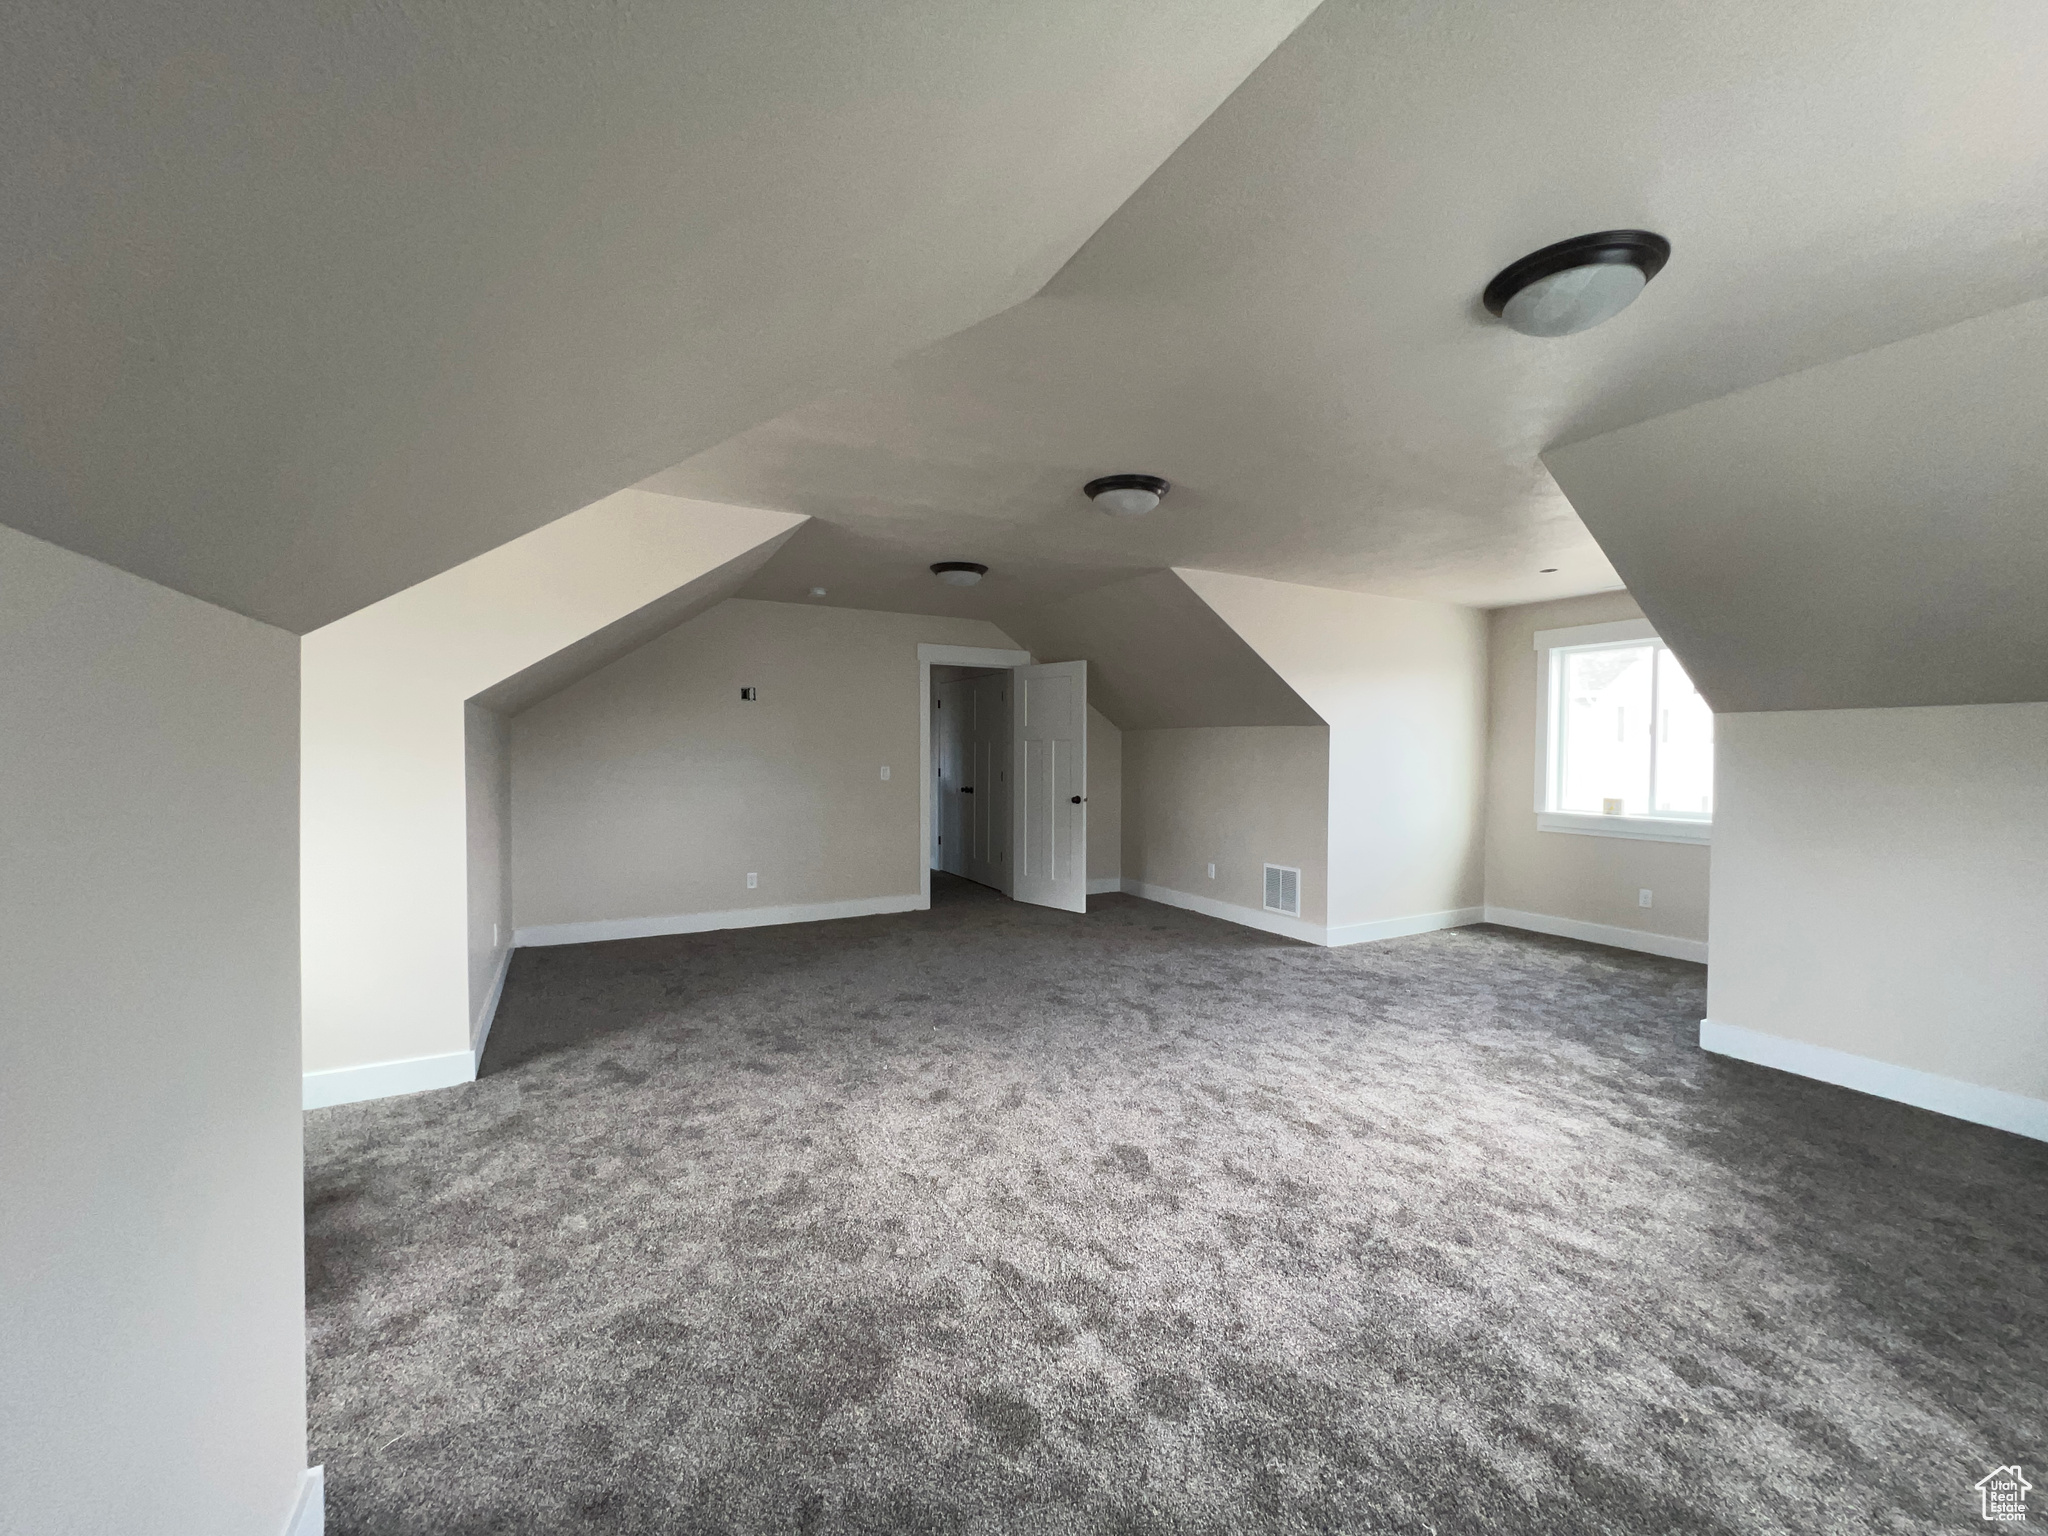 Additional living space featuring lofted ceiling and dark colored carpet